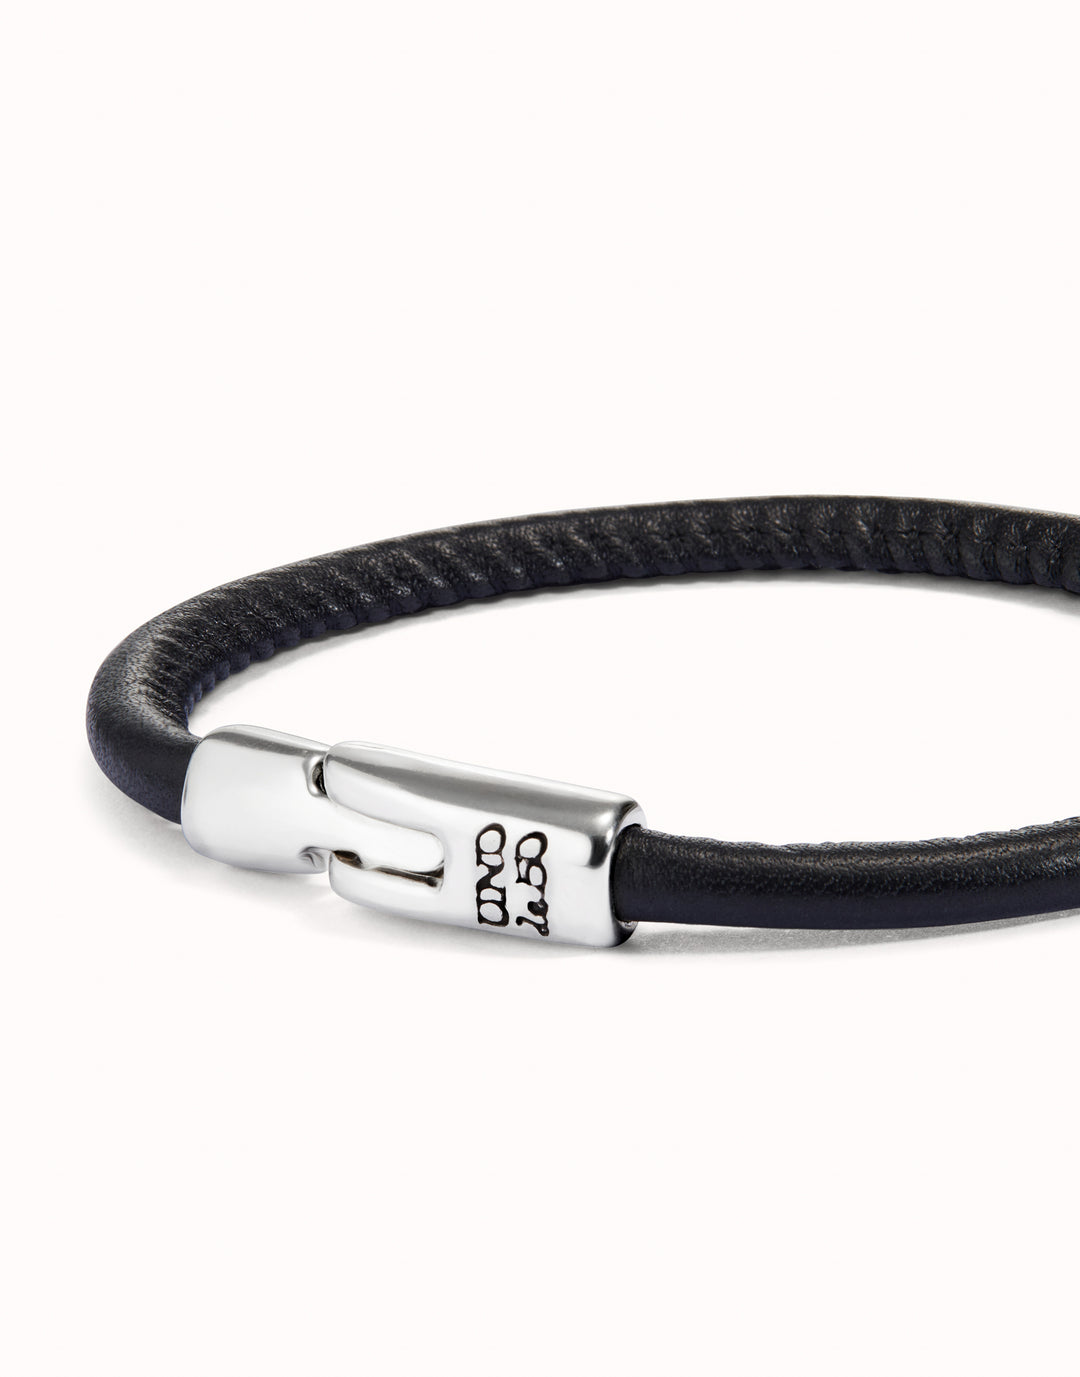 THIN LEATHER SMOOTH BLACK BRACELET-SILVER